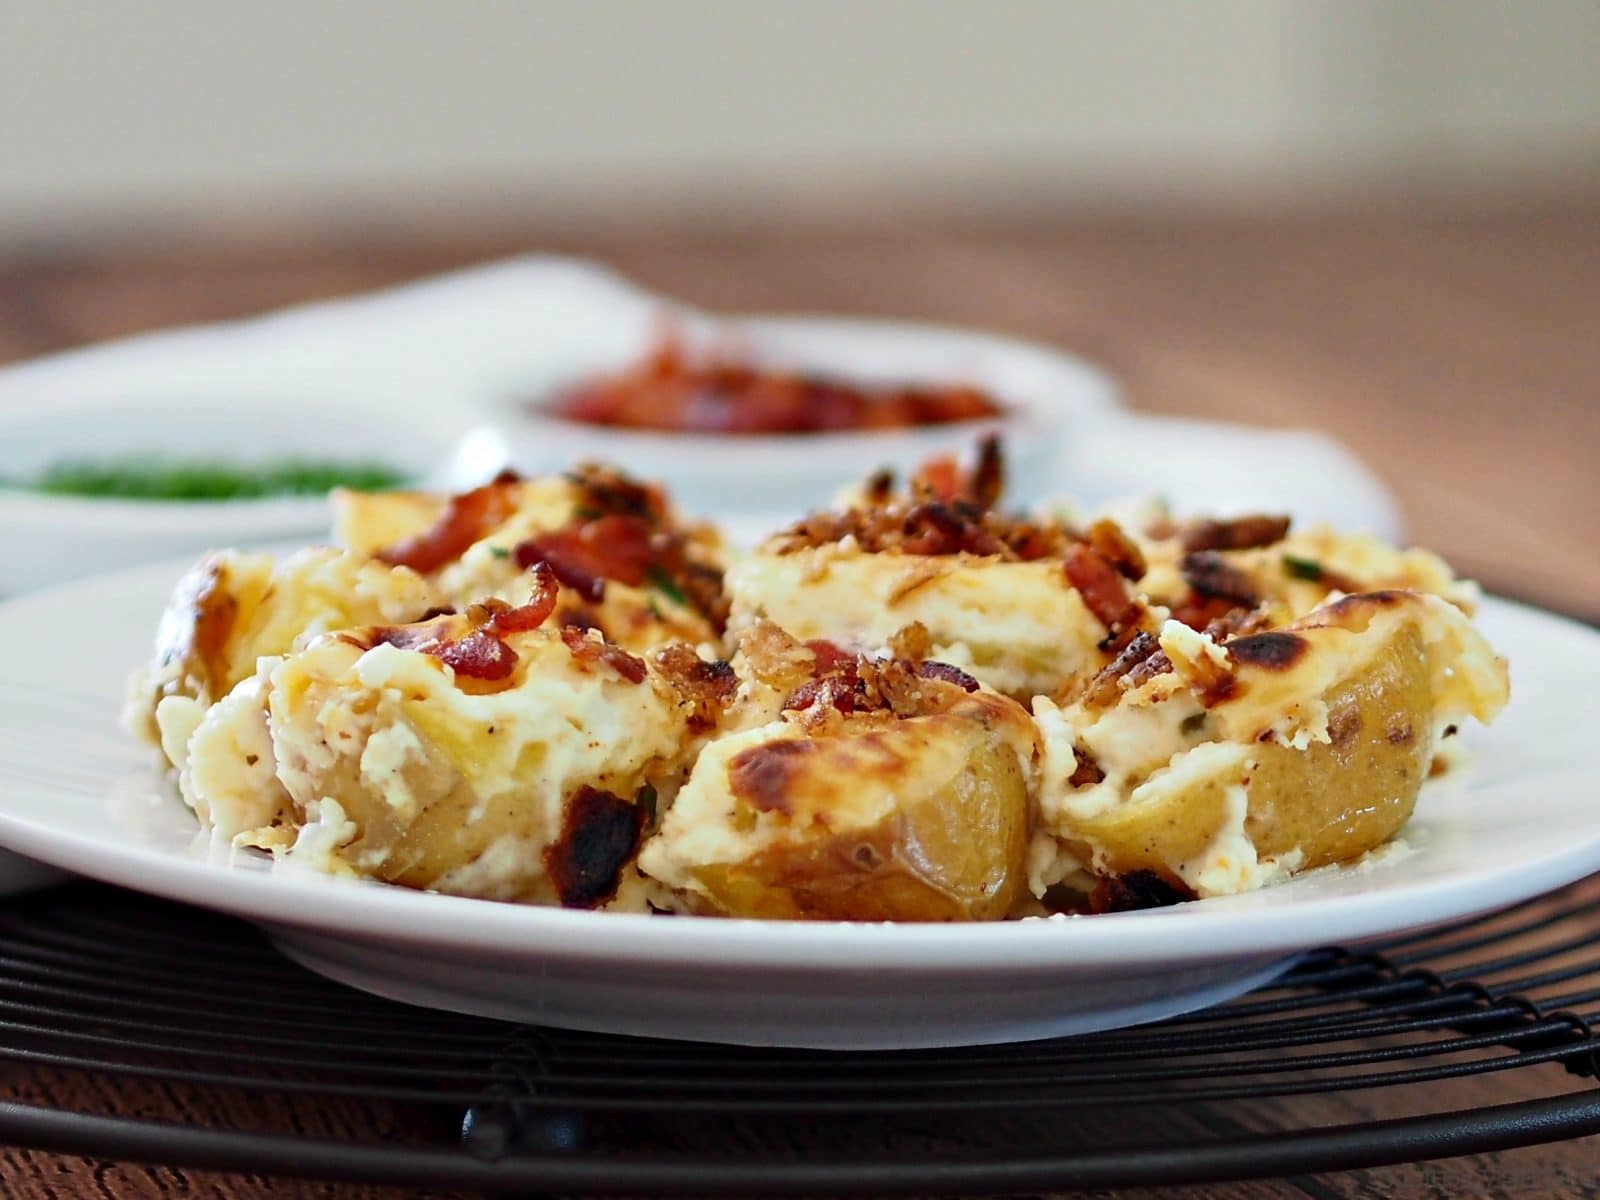 Loaded New Potato Casserole - roasted new potatoes combined with cheese, chives, sour cream and bacon. Serve as a side or a beautiful appetizer.